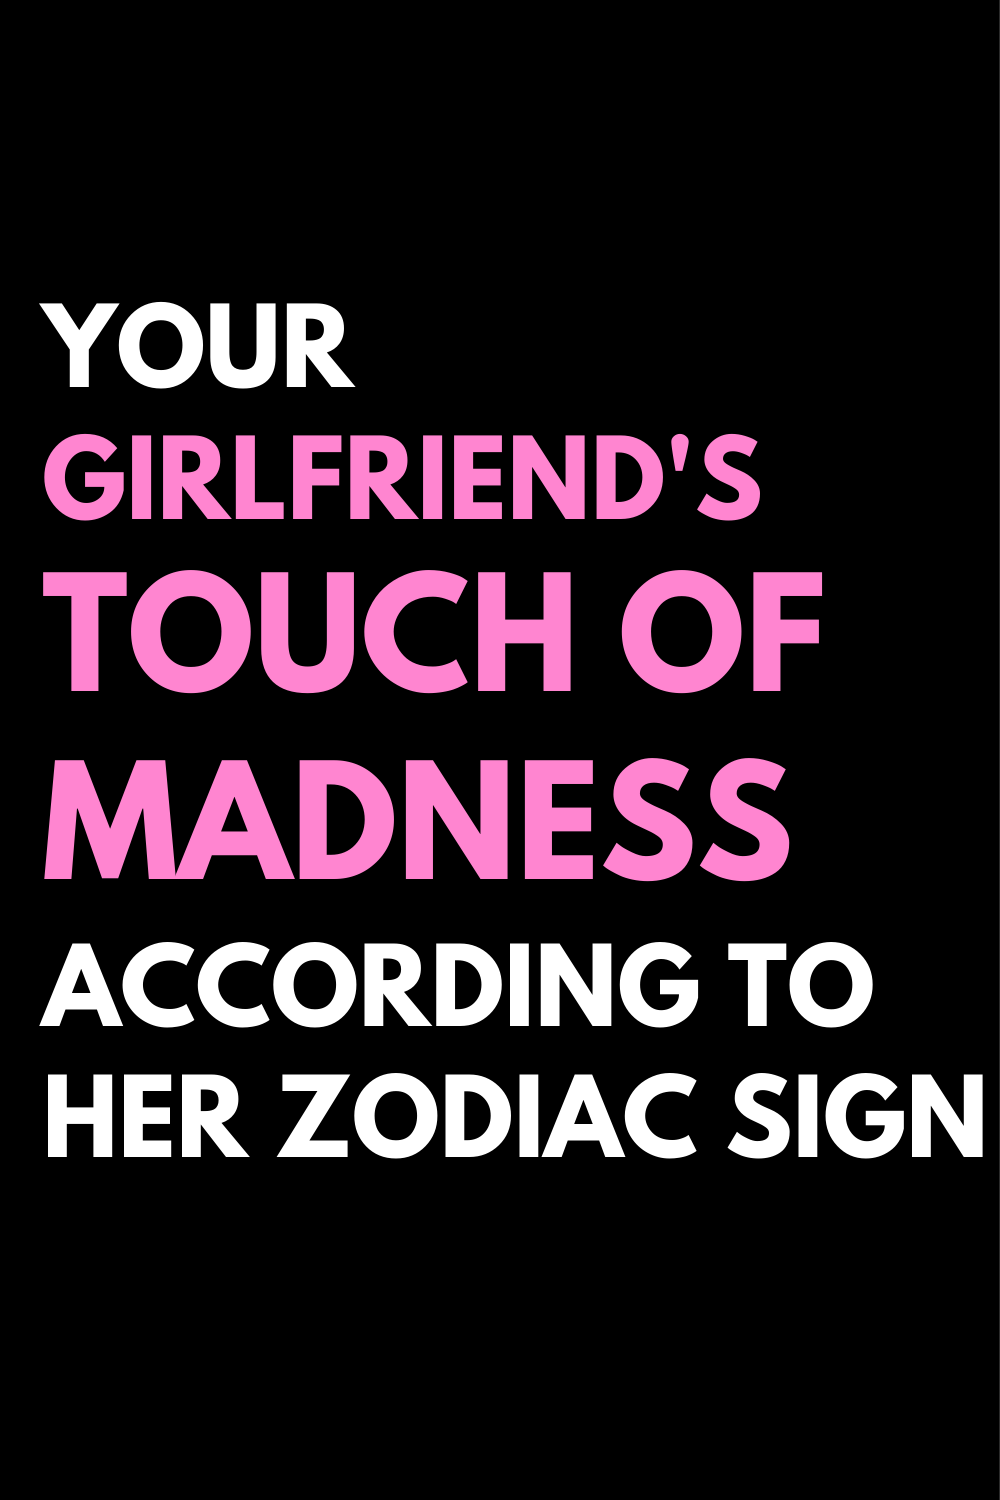 Your Girlfriend's Touch of Madness According to Her Zodiac Sign